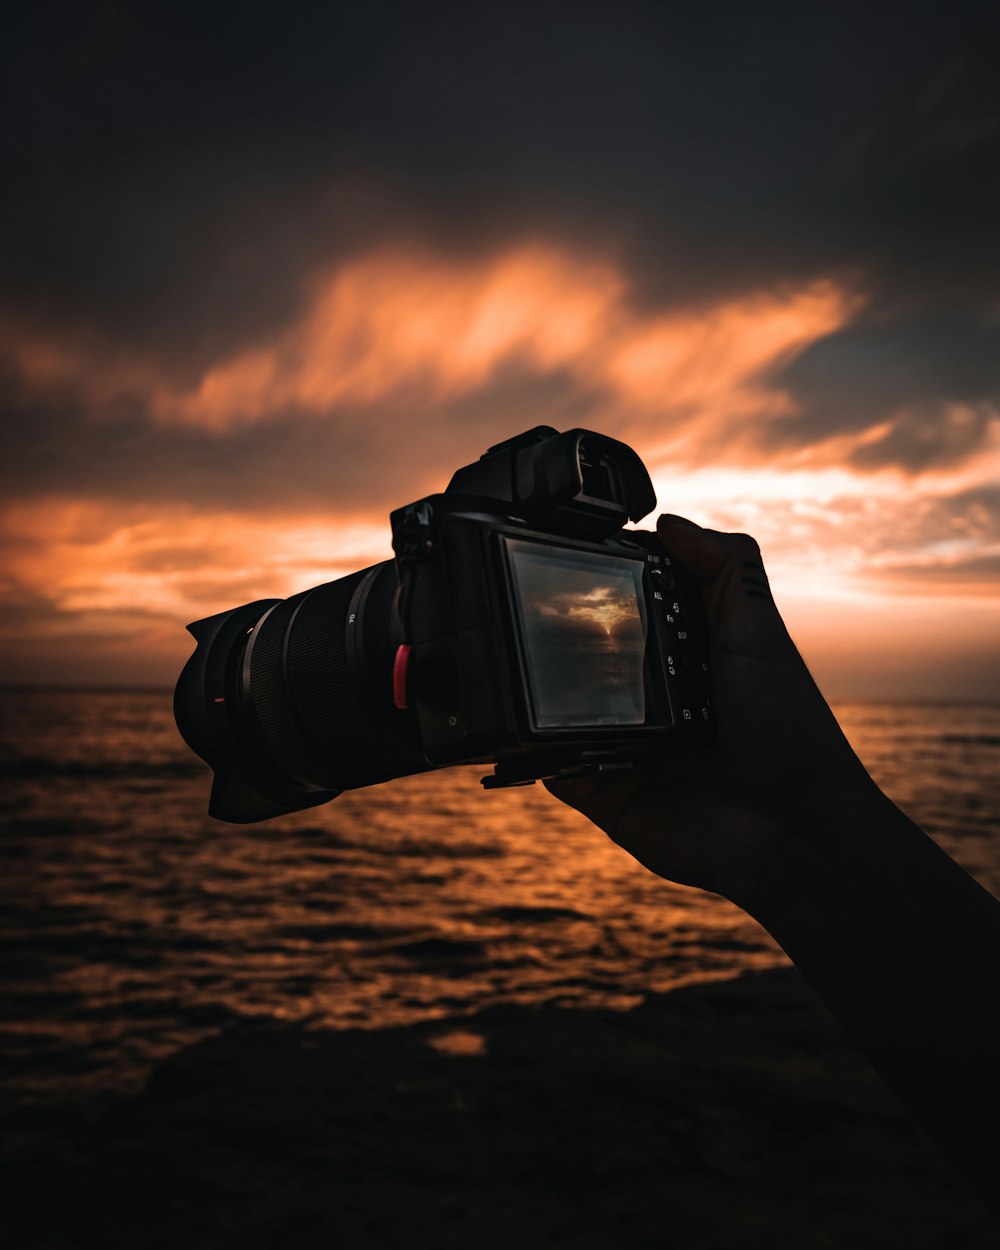 1000+ Camera Wallpaper Pictures | Download Free Images on Unsplash